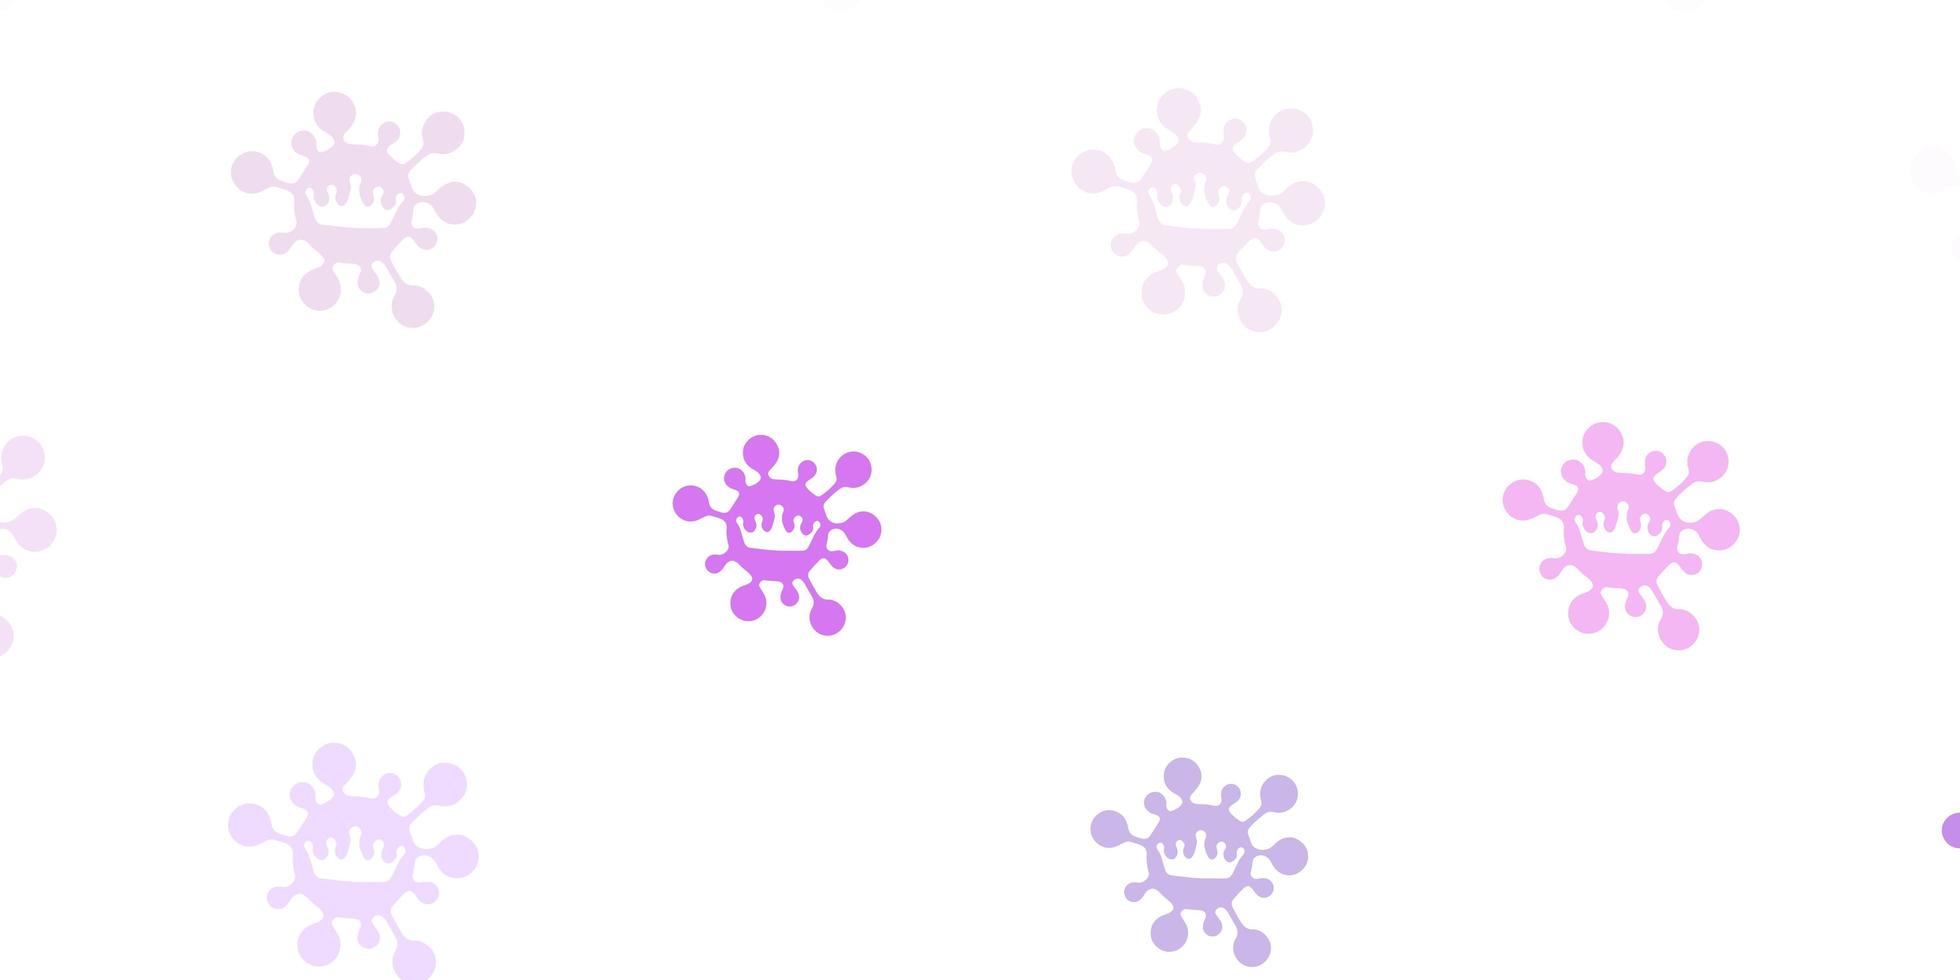 Light pink vector texture with disease symbols